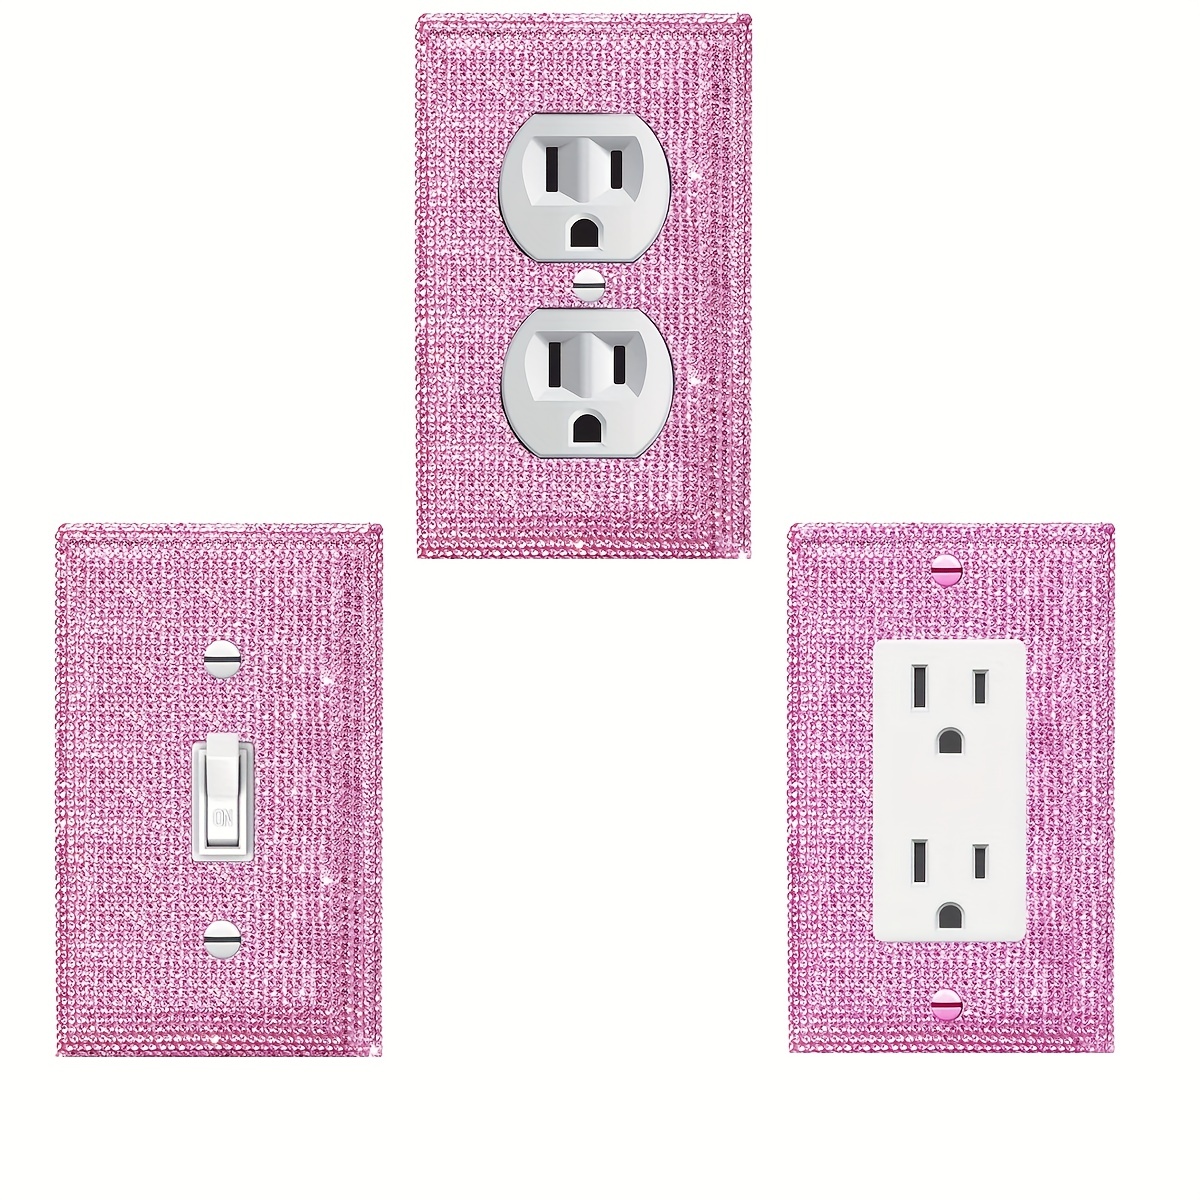 Glitter Light Switch Plates and Outlet Covers